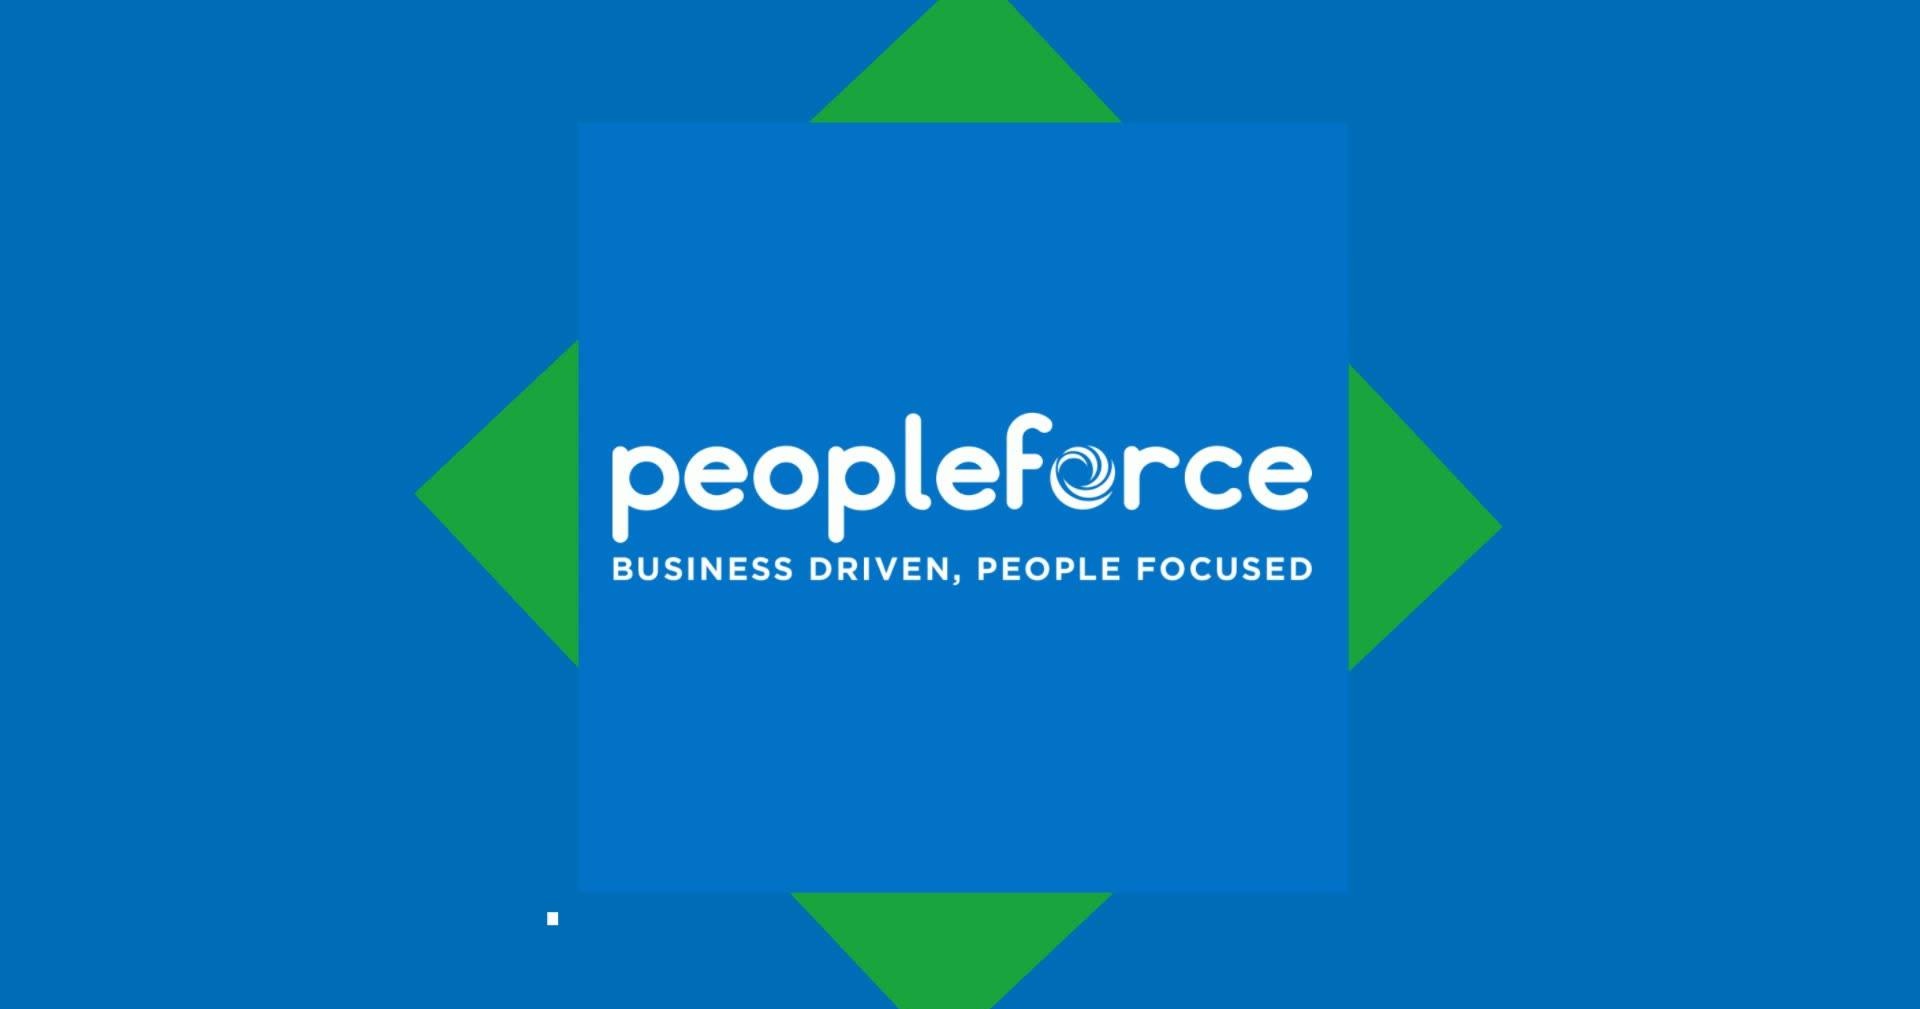 People-force